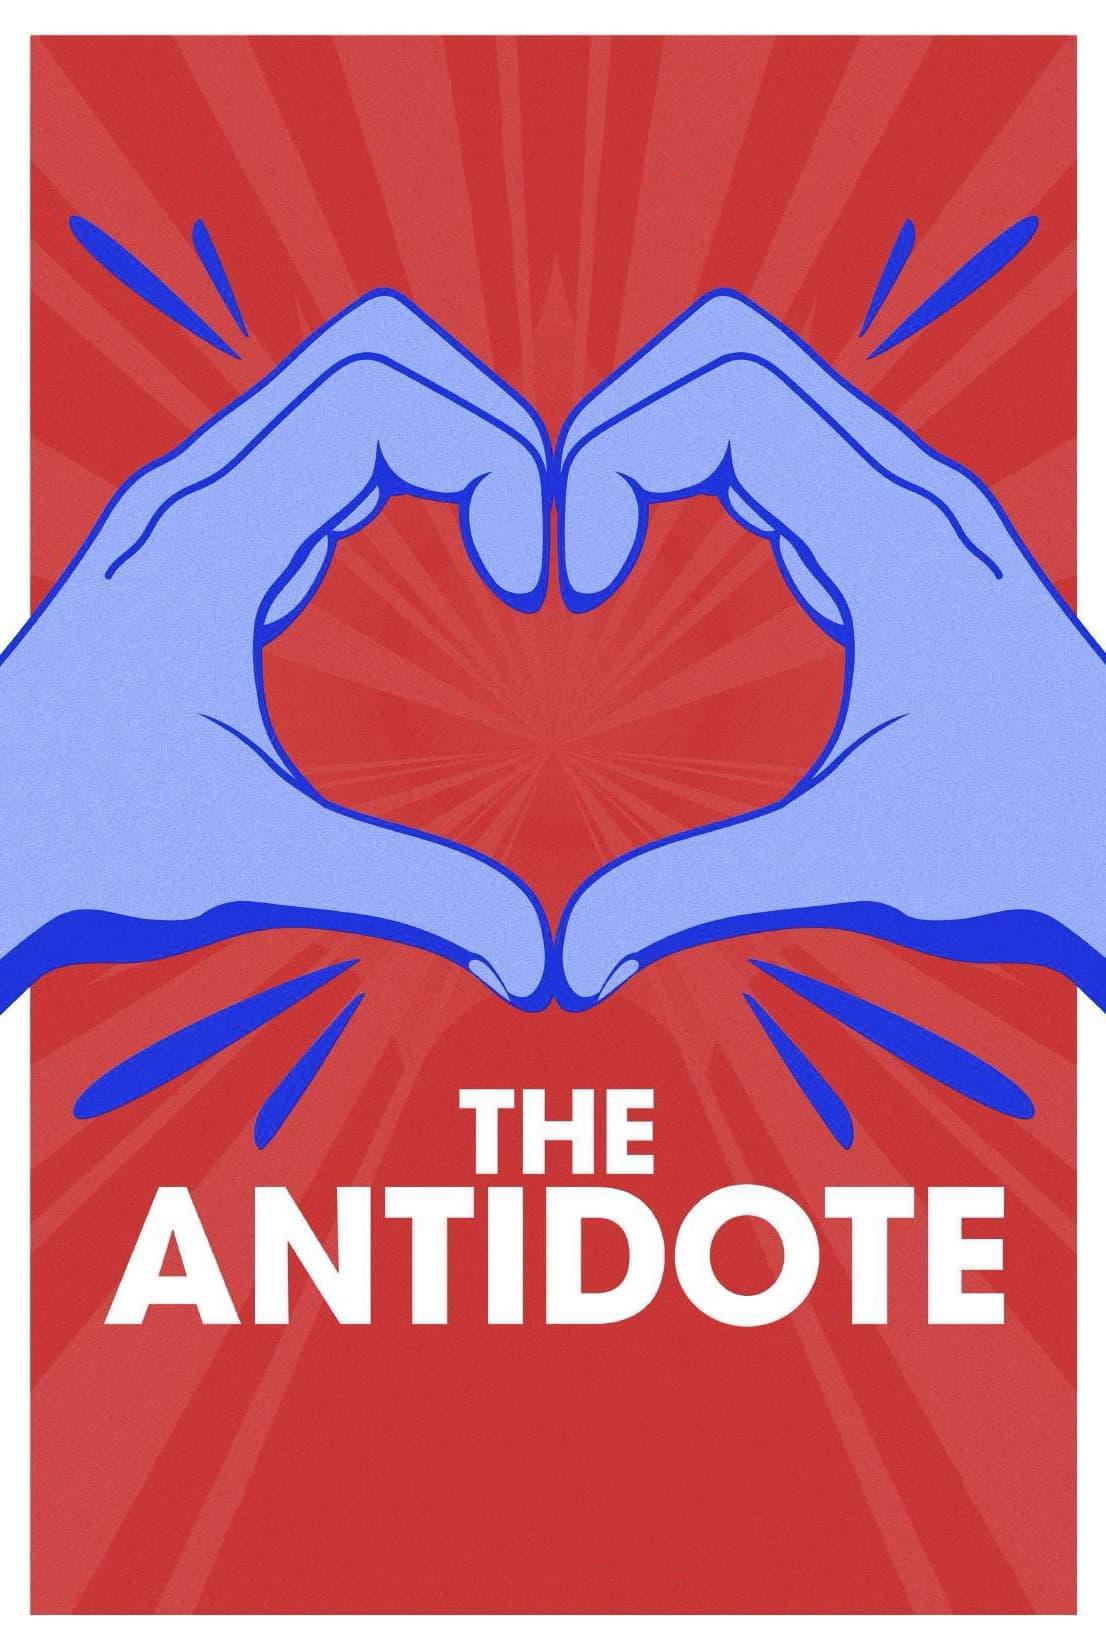 The Antidote poster